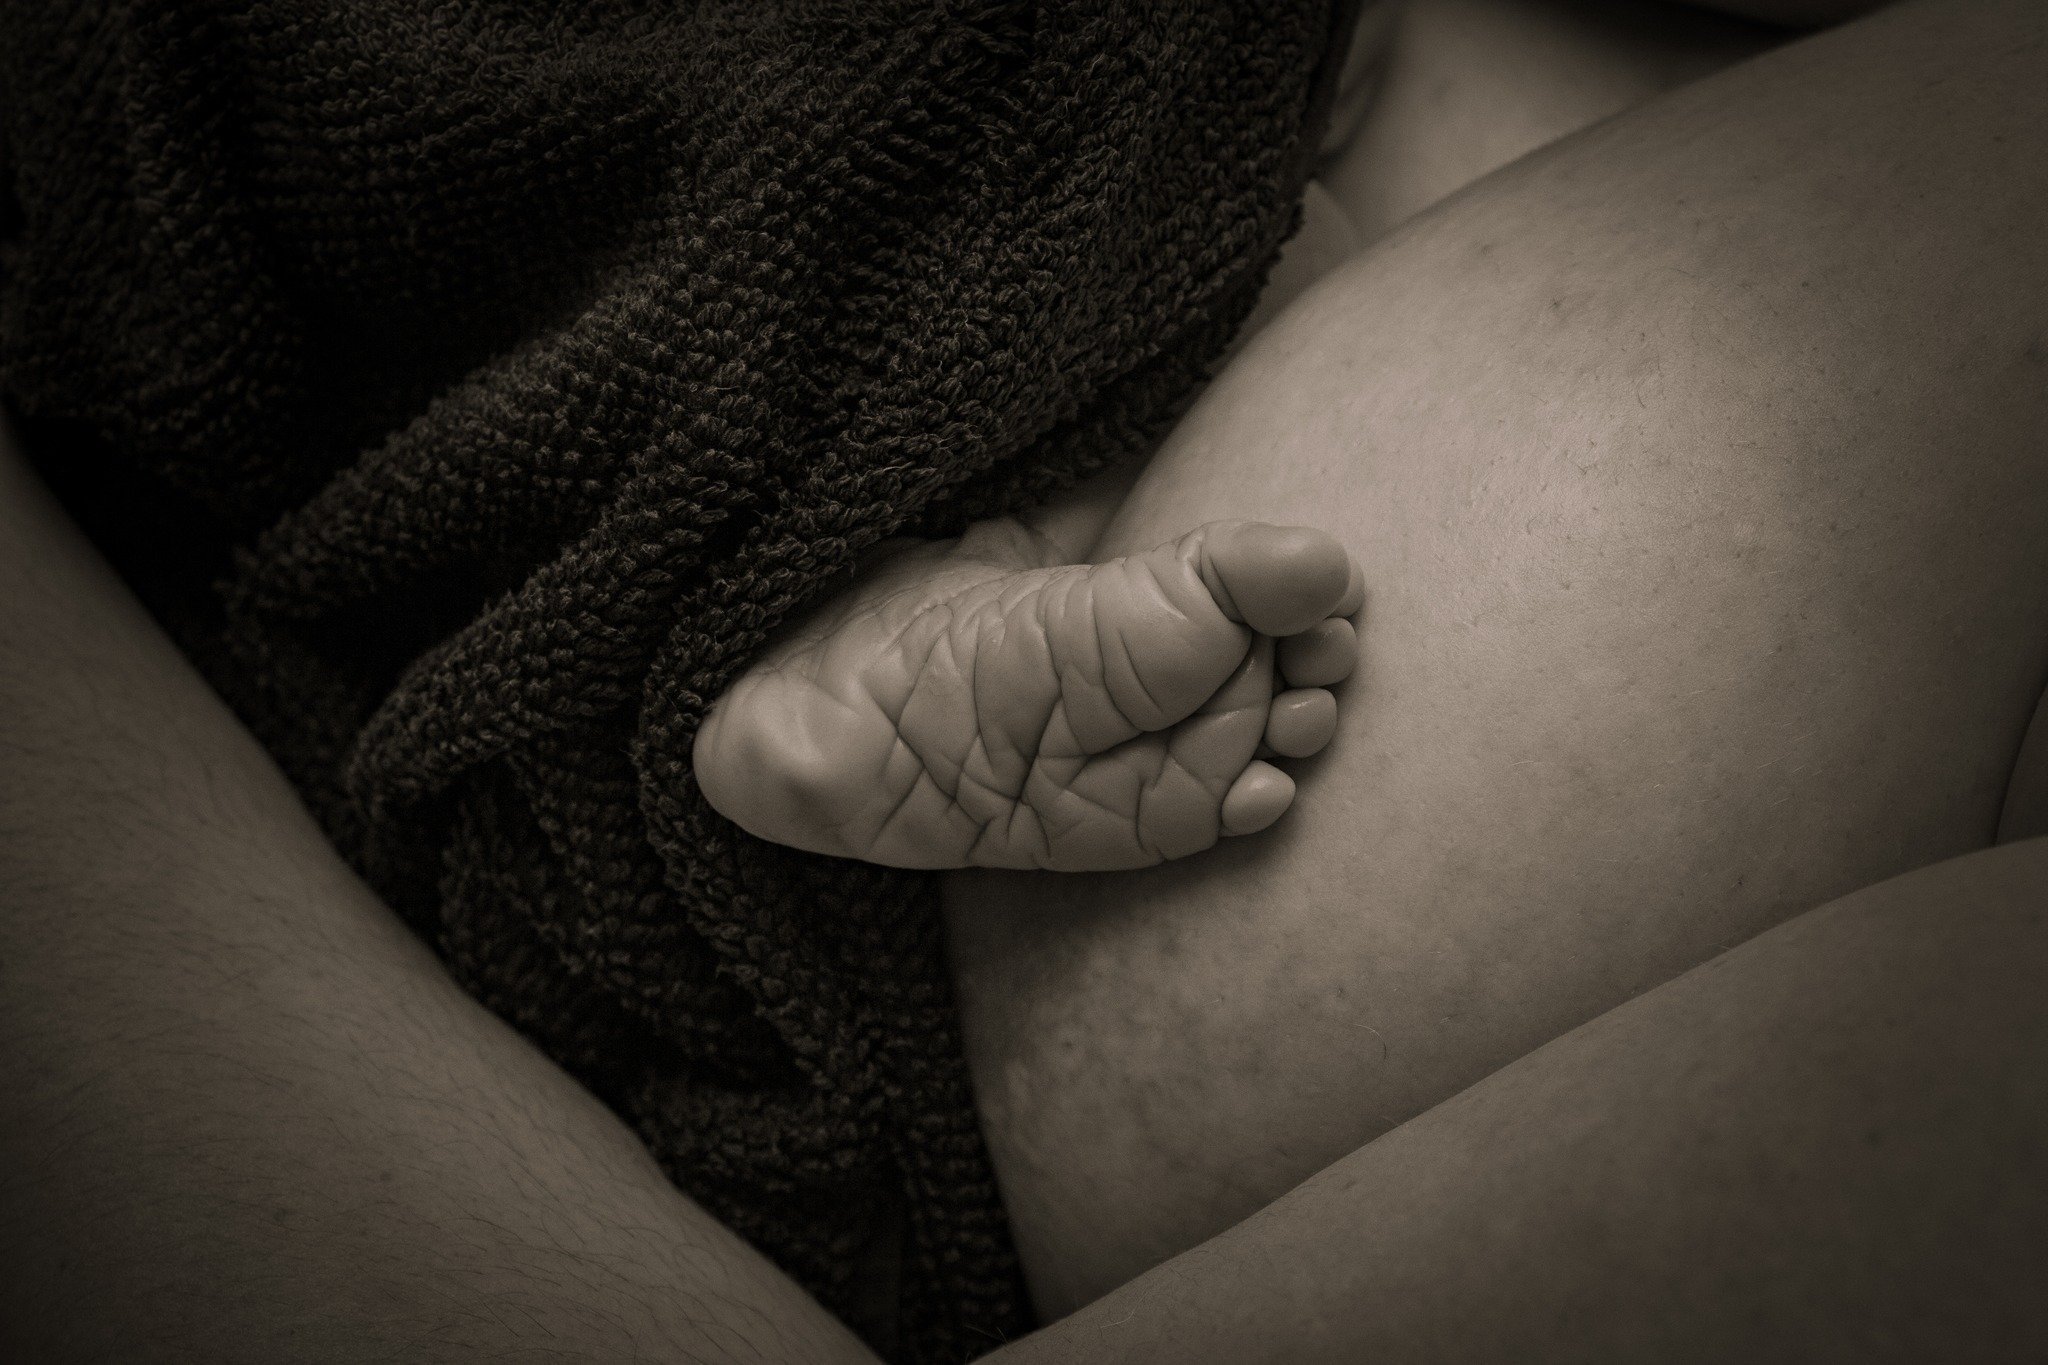 It's the tiny details that make birth photography so bloody special

A loving touch from your partner

Your babies first breath of air

Their tiny wrinkly feet and hands

Your first meal as a mother

I could go on and on with the minute moments I've 